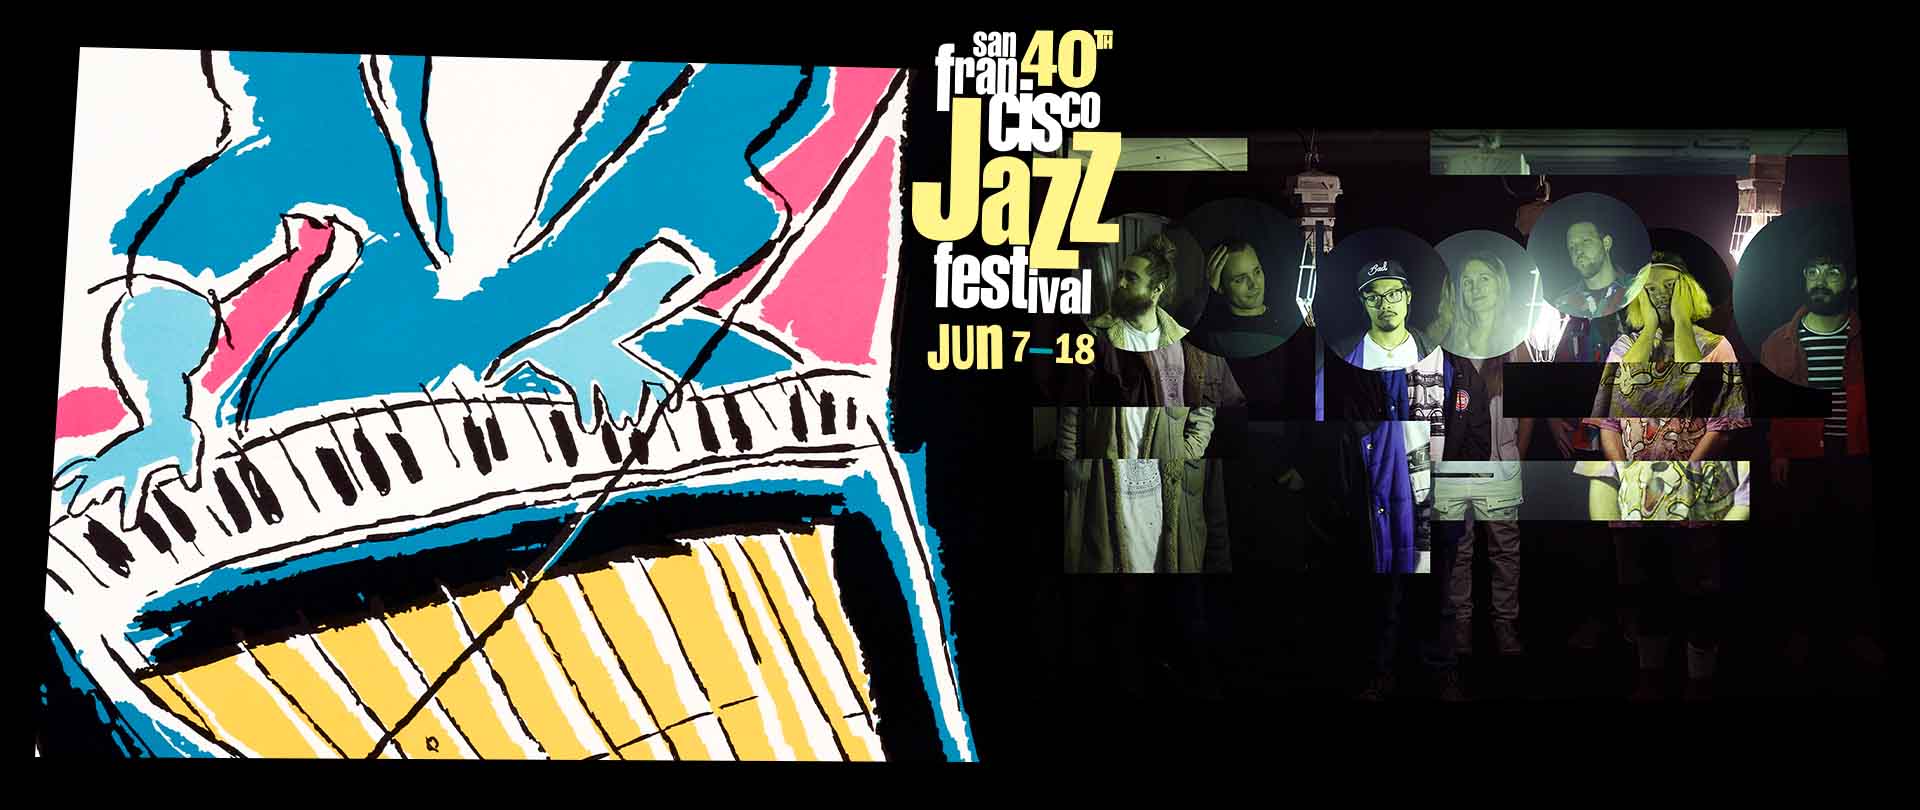 A group photo of High Pulp with the 40th San Francisco Jazz Festival artwork